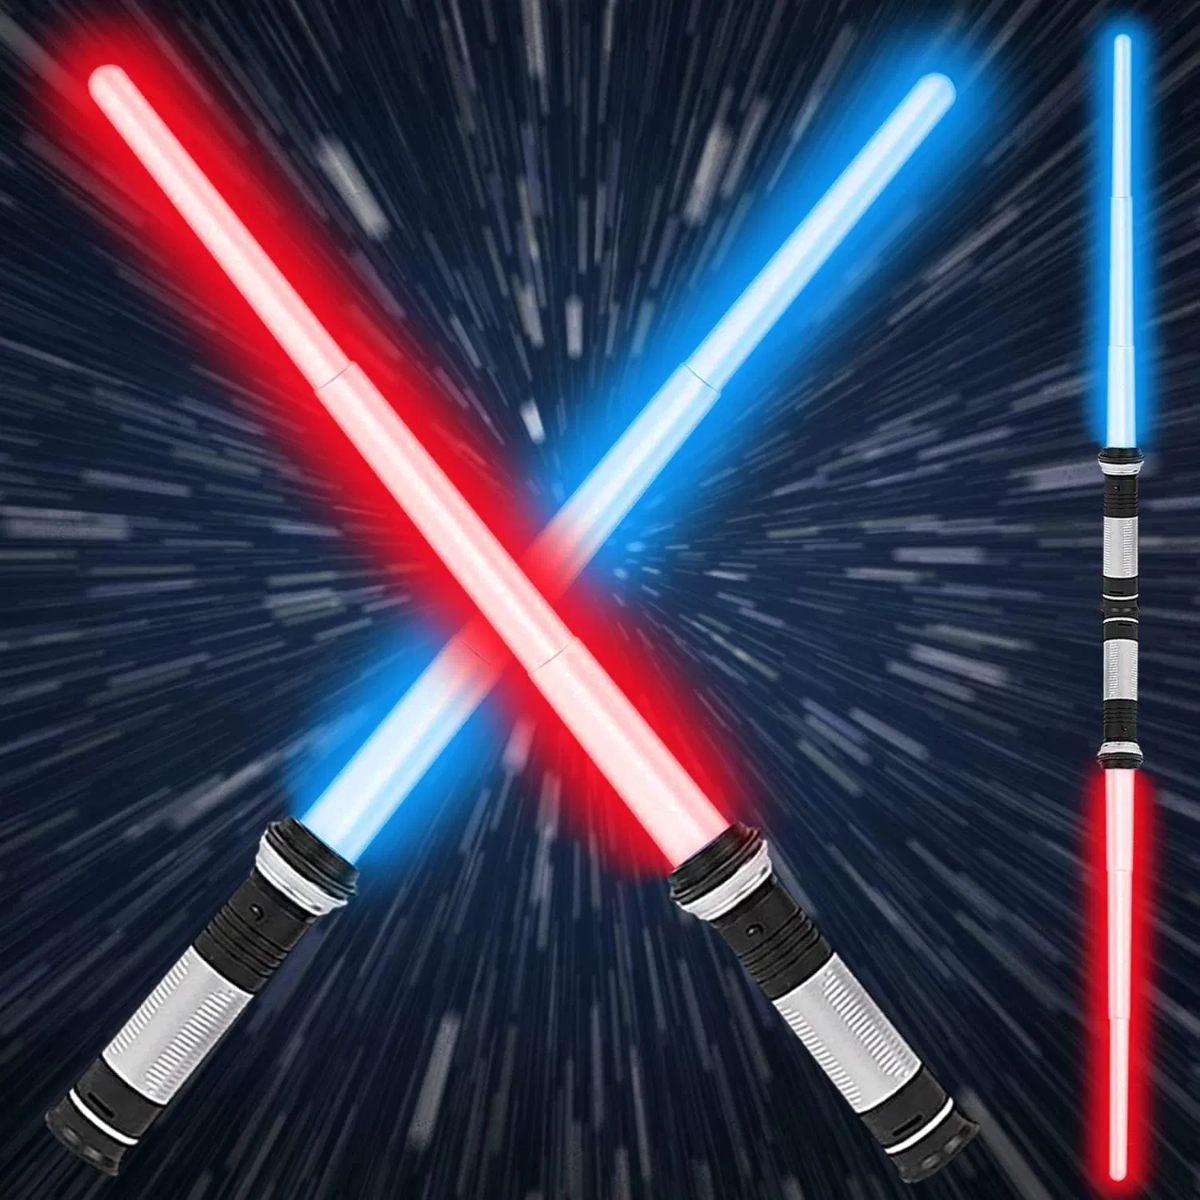 Two LED Light Up Sabers with Sound - Retractable 7 Colors Light Saber Sword for Kids - 2 Pack, including Darth Maul's lightsaber, against a dark background.